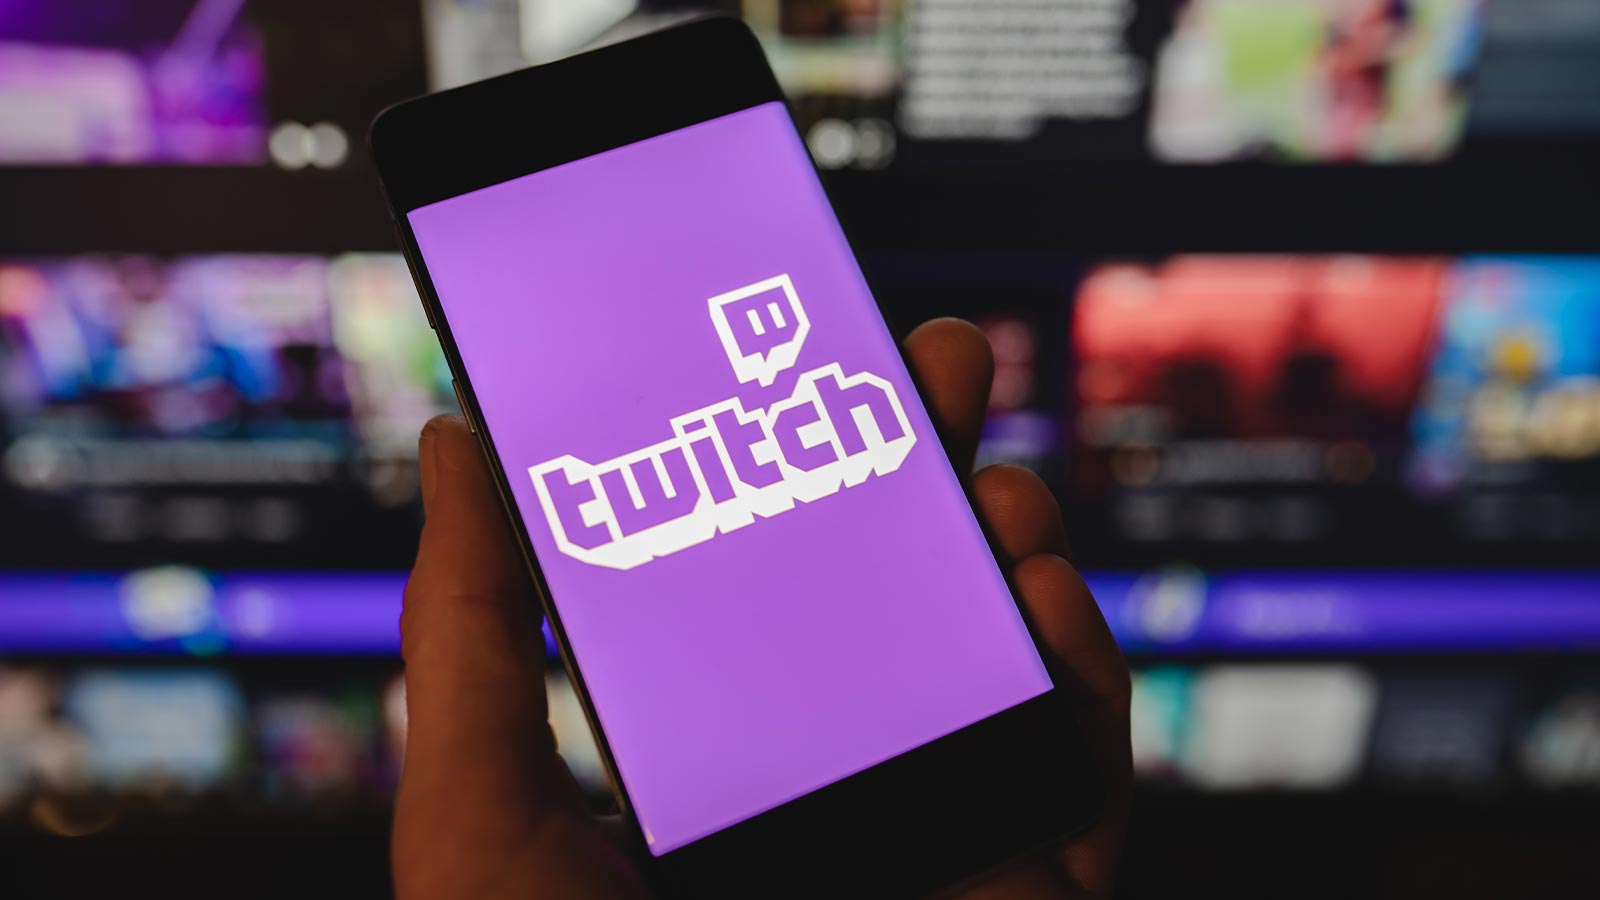 The future of streaming on Twitch how could it change